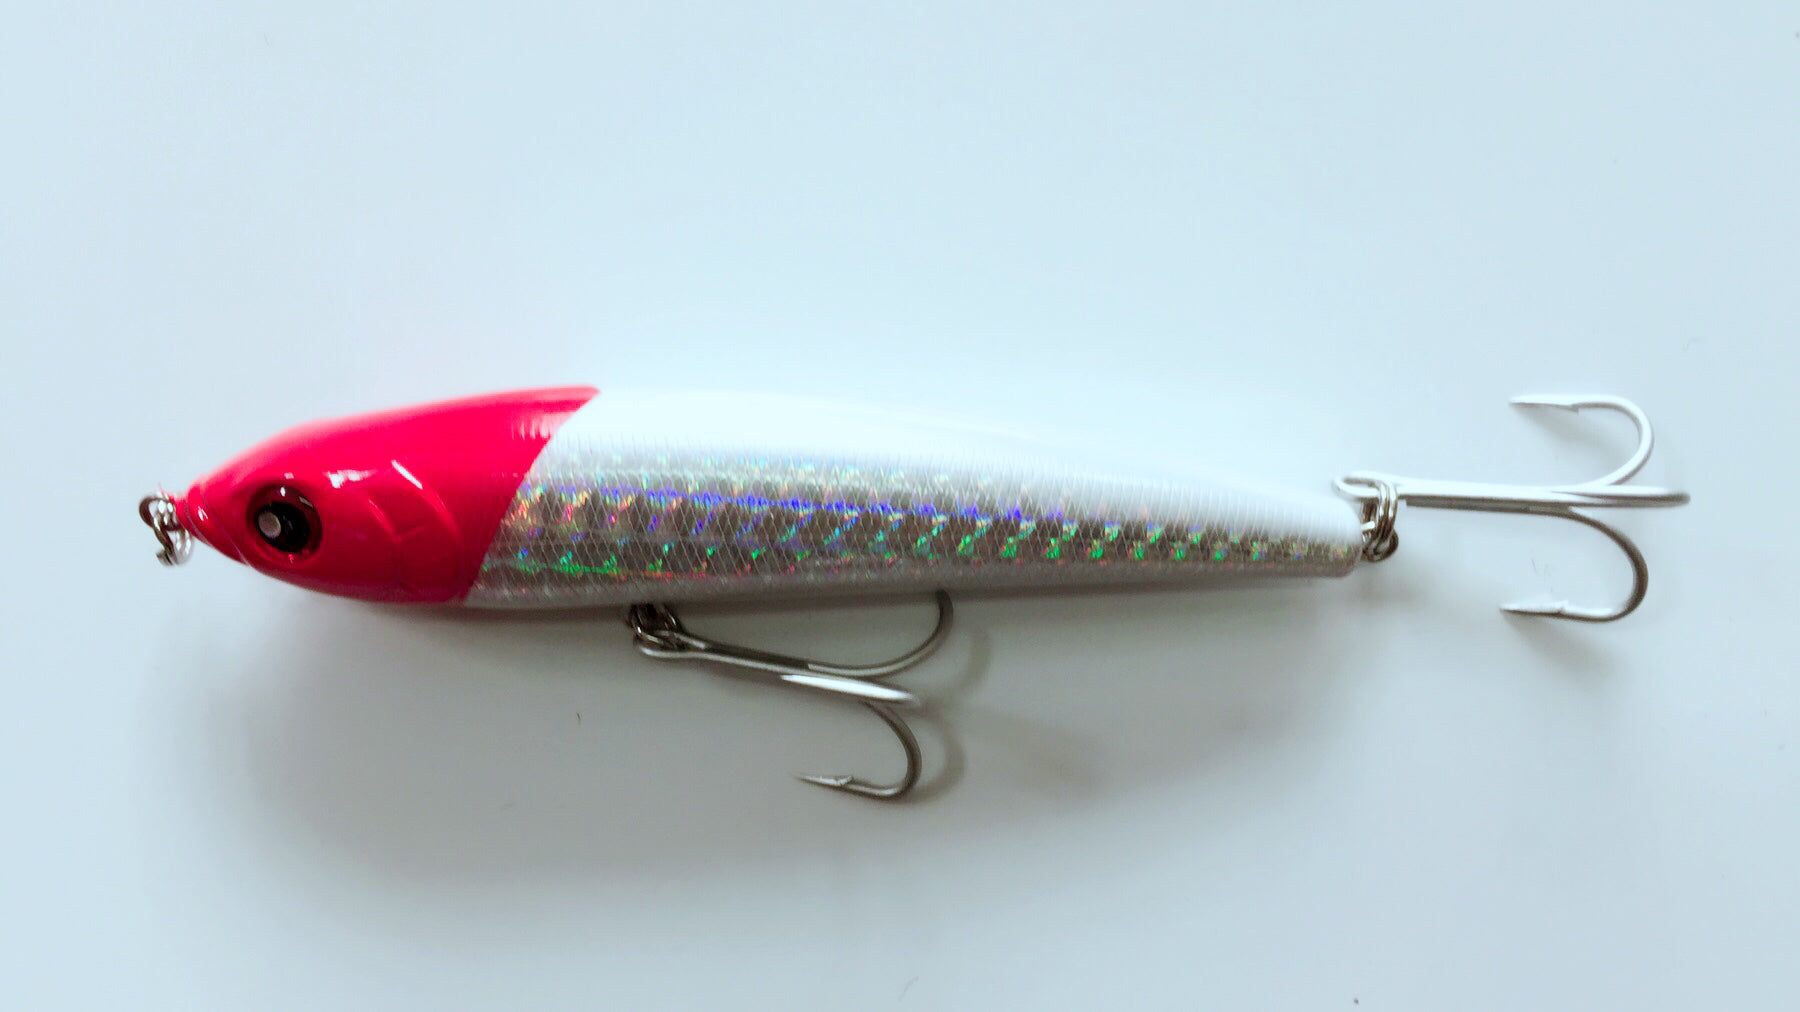 180mm hard lure with Wiggly gesture, big tongue can reach to deep water at dragging especially for sea water trolling